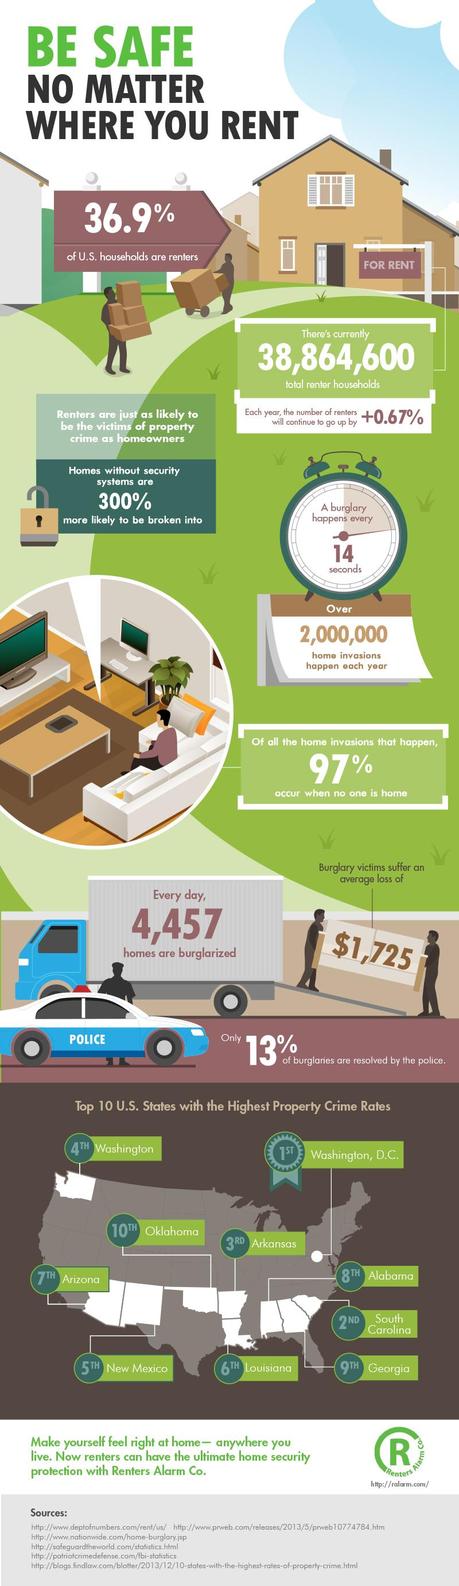 Infographic on Home Security For Renters